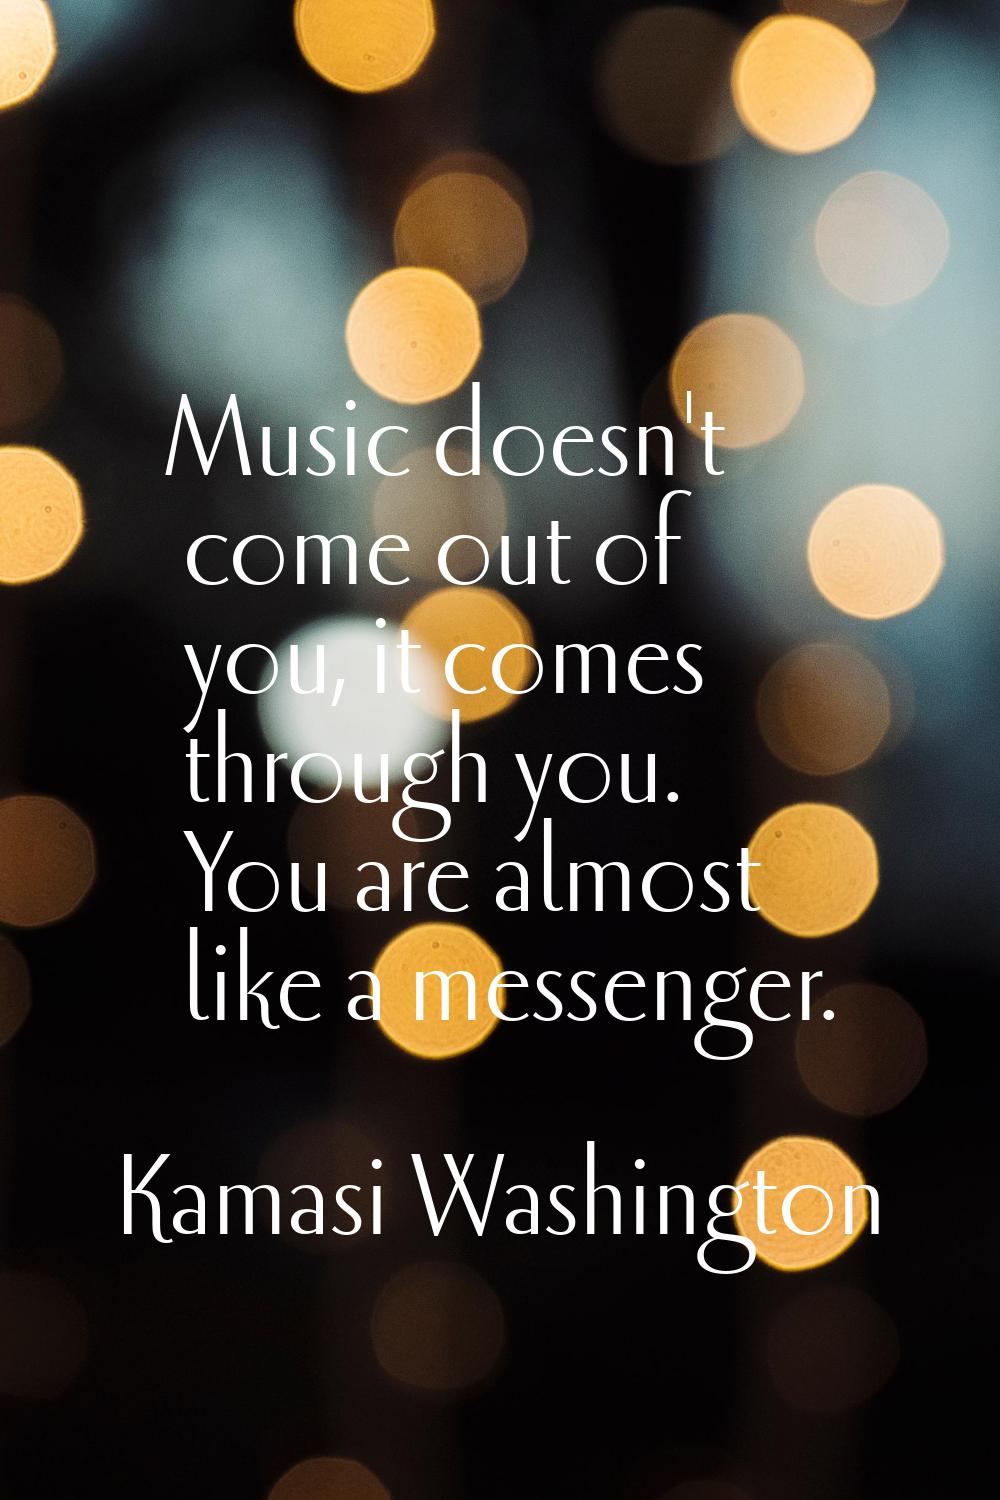 Music doesn't come out of you, it comes through you. You are almost like a messenger.